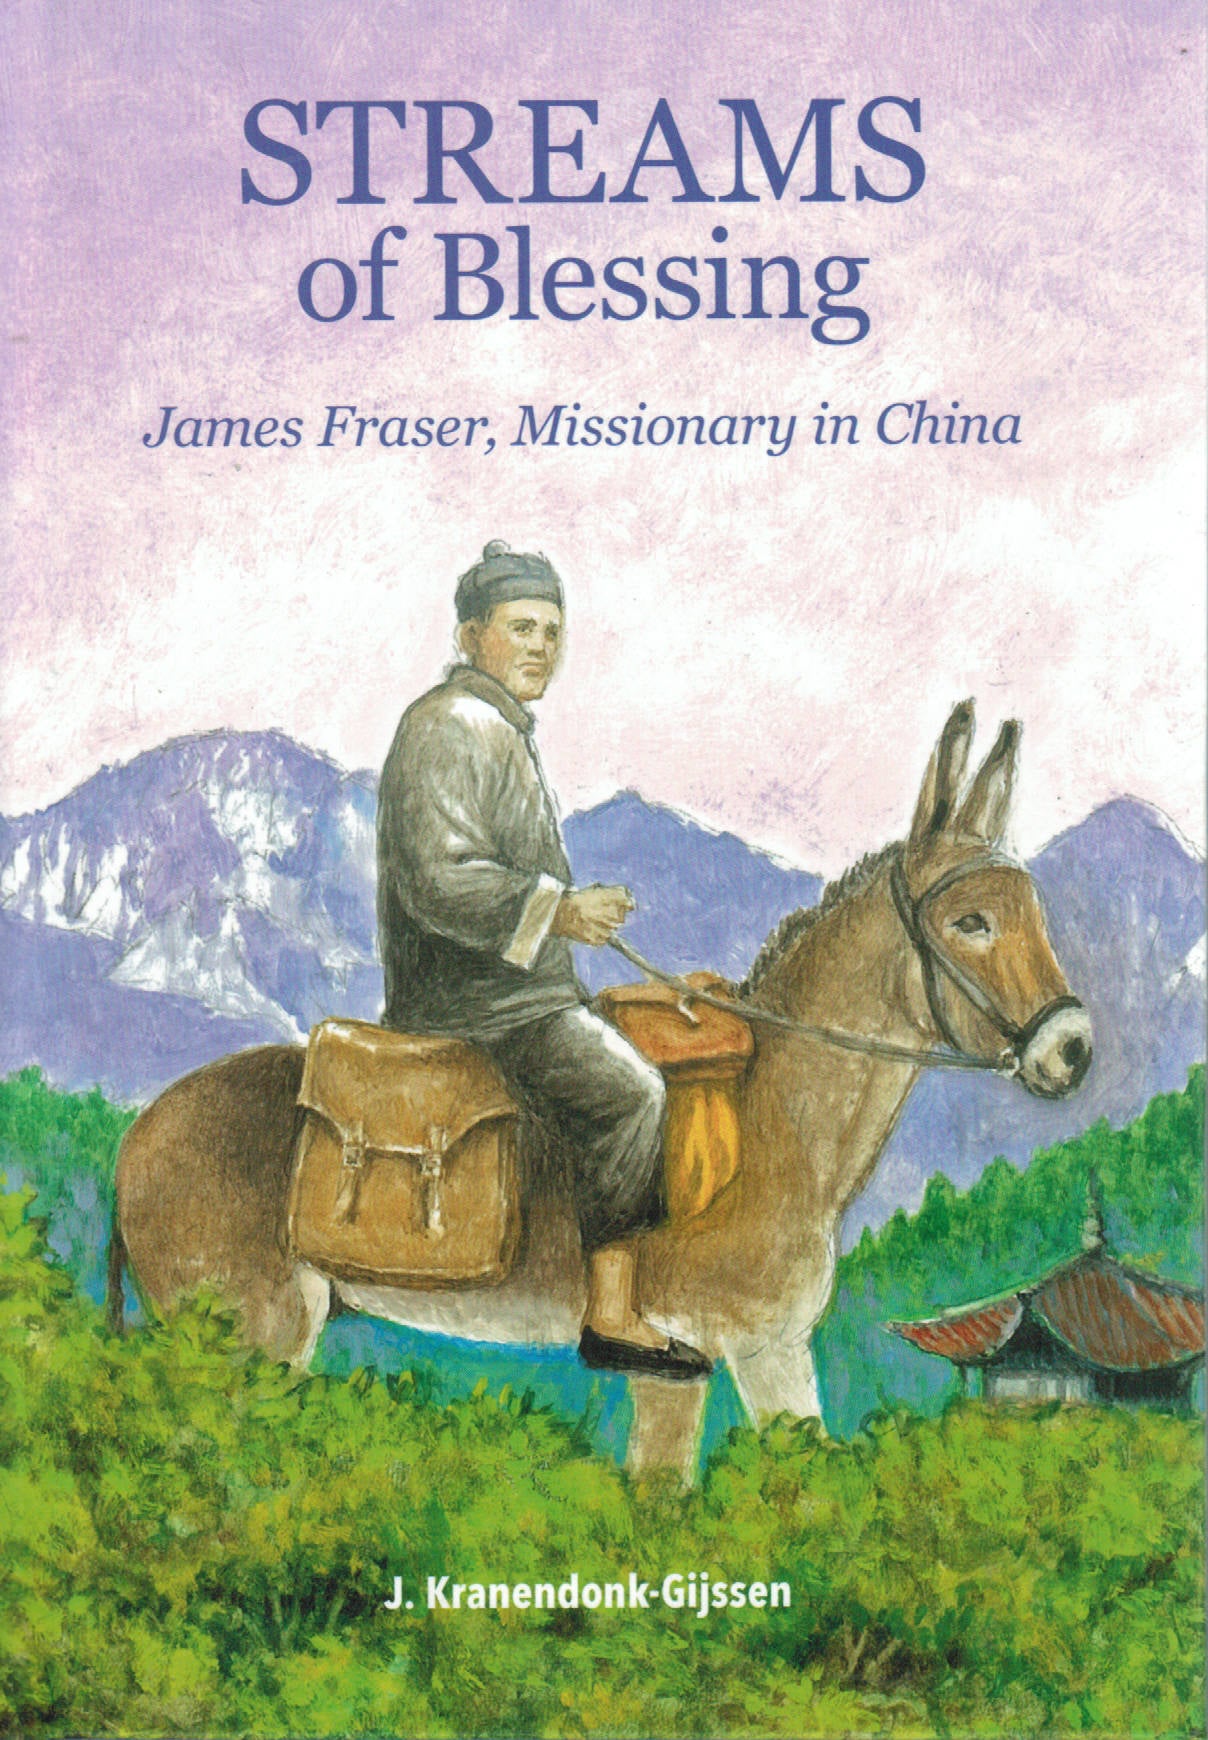 Streams of Blessing: James Fraser, Missionary in China